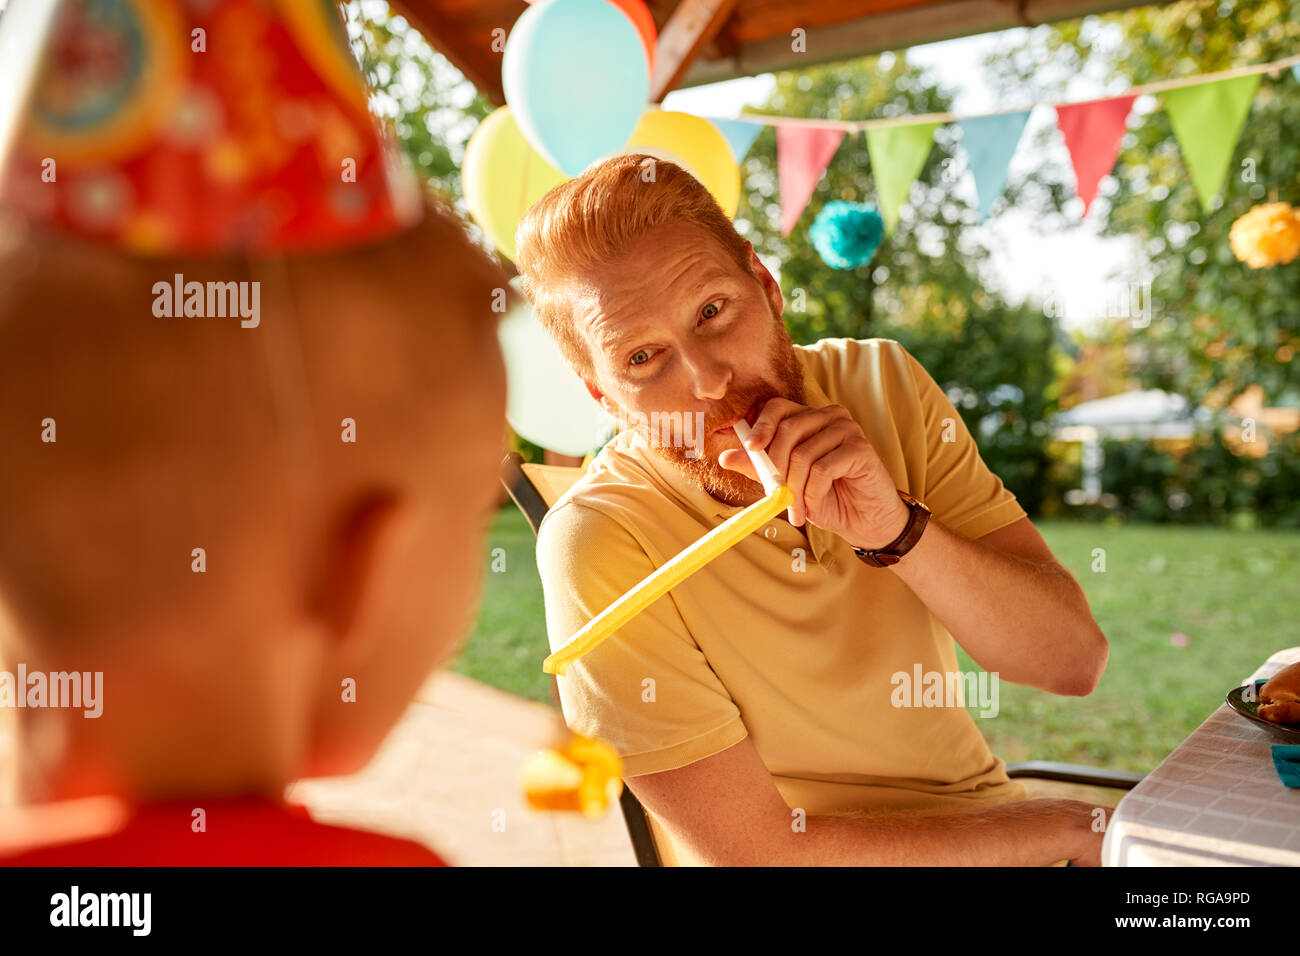 Playful father with son on a garden birthday party Stock Photo